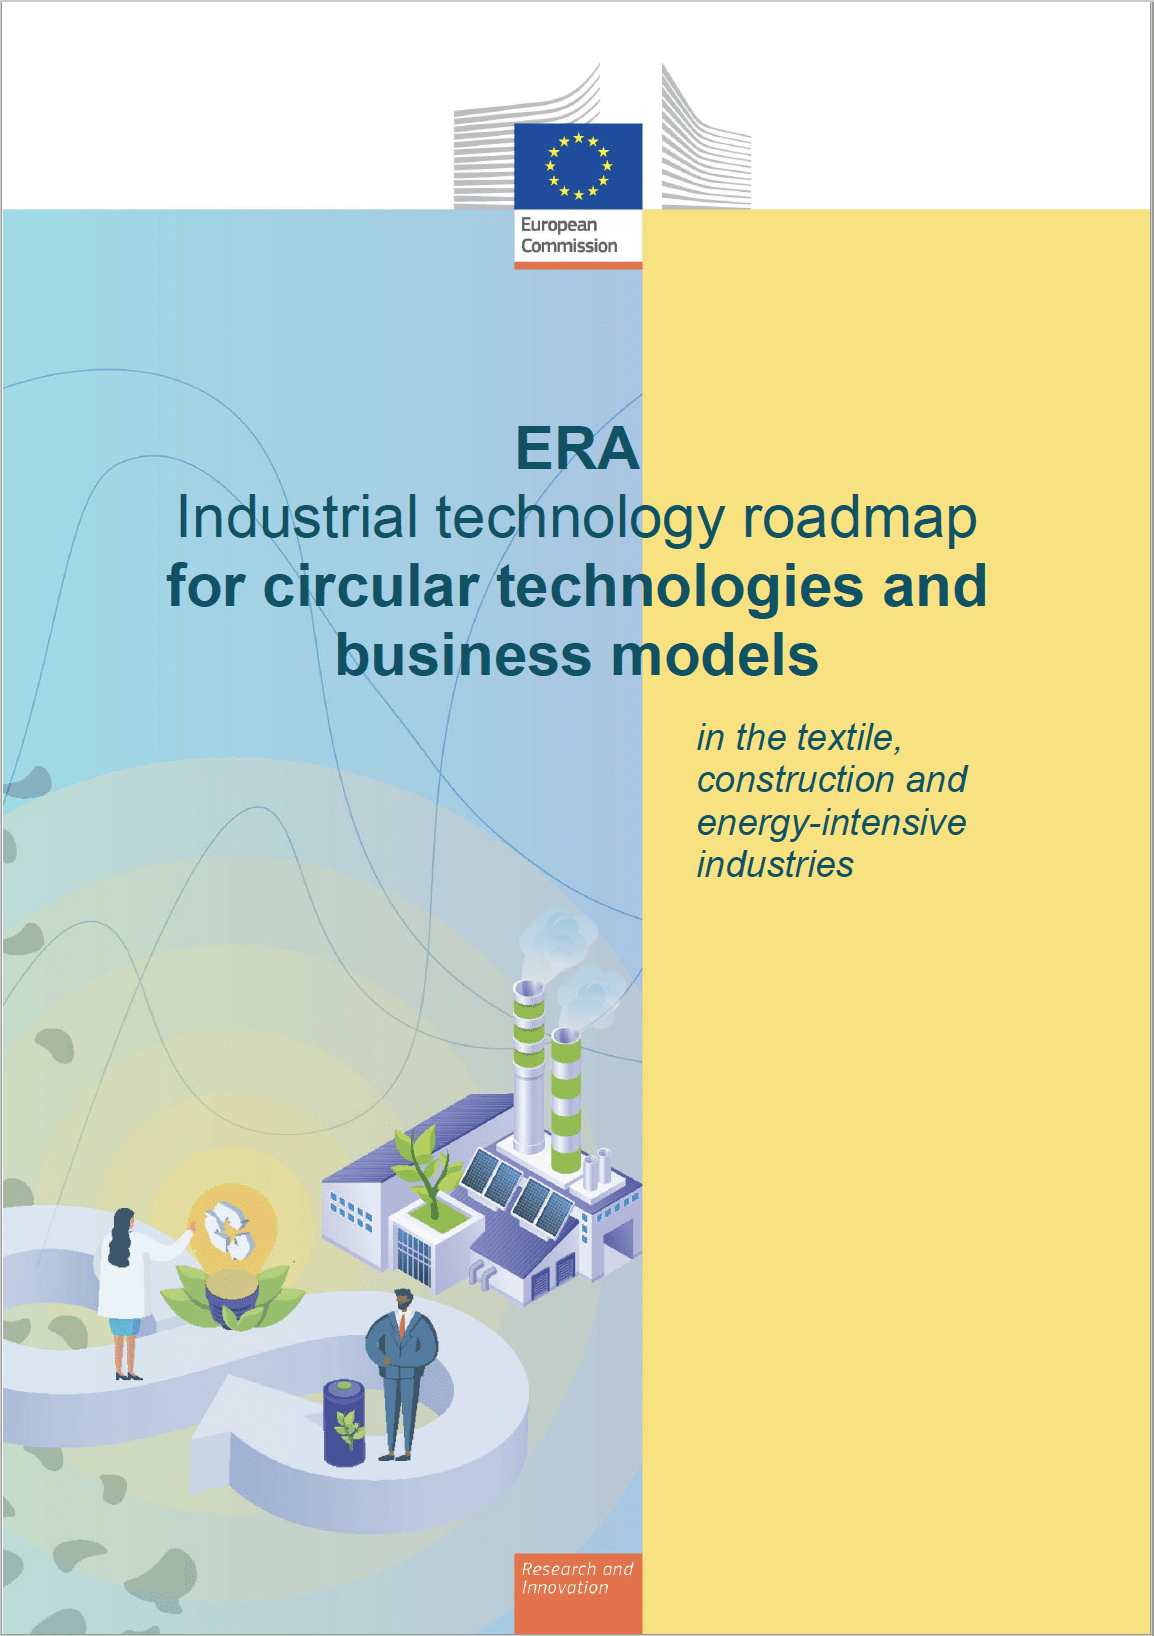 EU roadmap highlights key industrial technologies for the textile, construction and energy-intensive industries to become more circular